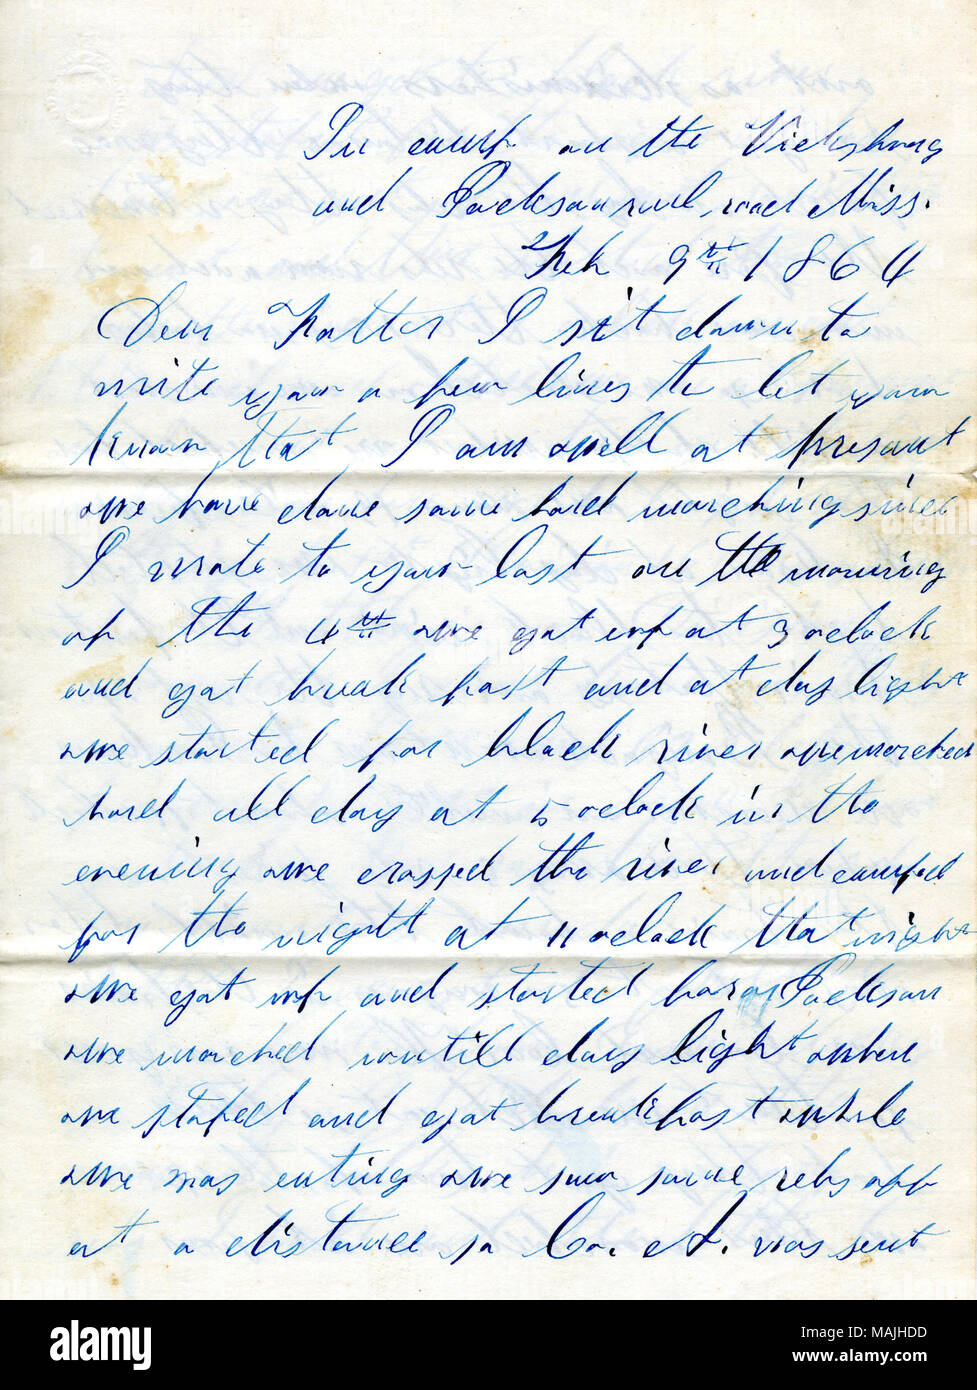 Describes marches and skirmishes taking place around Vicksburg, Mississippi.  Transcription: In camp on the Vicksburg and Jackson rail road Miss. Feb 9th 1864 Dear Father I sit down to write you a few lines to let you know that I am well at presant we have done some hard marching since I wrote to you last on the morning of the 4th we got up at 3 oclock and got break fast and at day light we started for black river we marched hard all day at 5 oclock in the evening we crossed the river and camped for the night at 11 oclock that night we got up and started for Jackson we marched untill day light Stock Photo